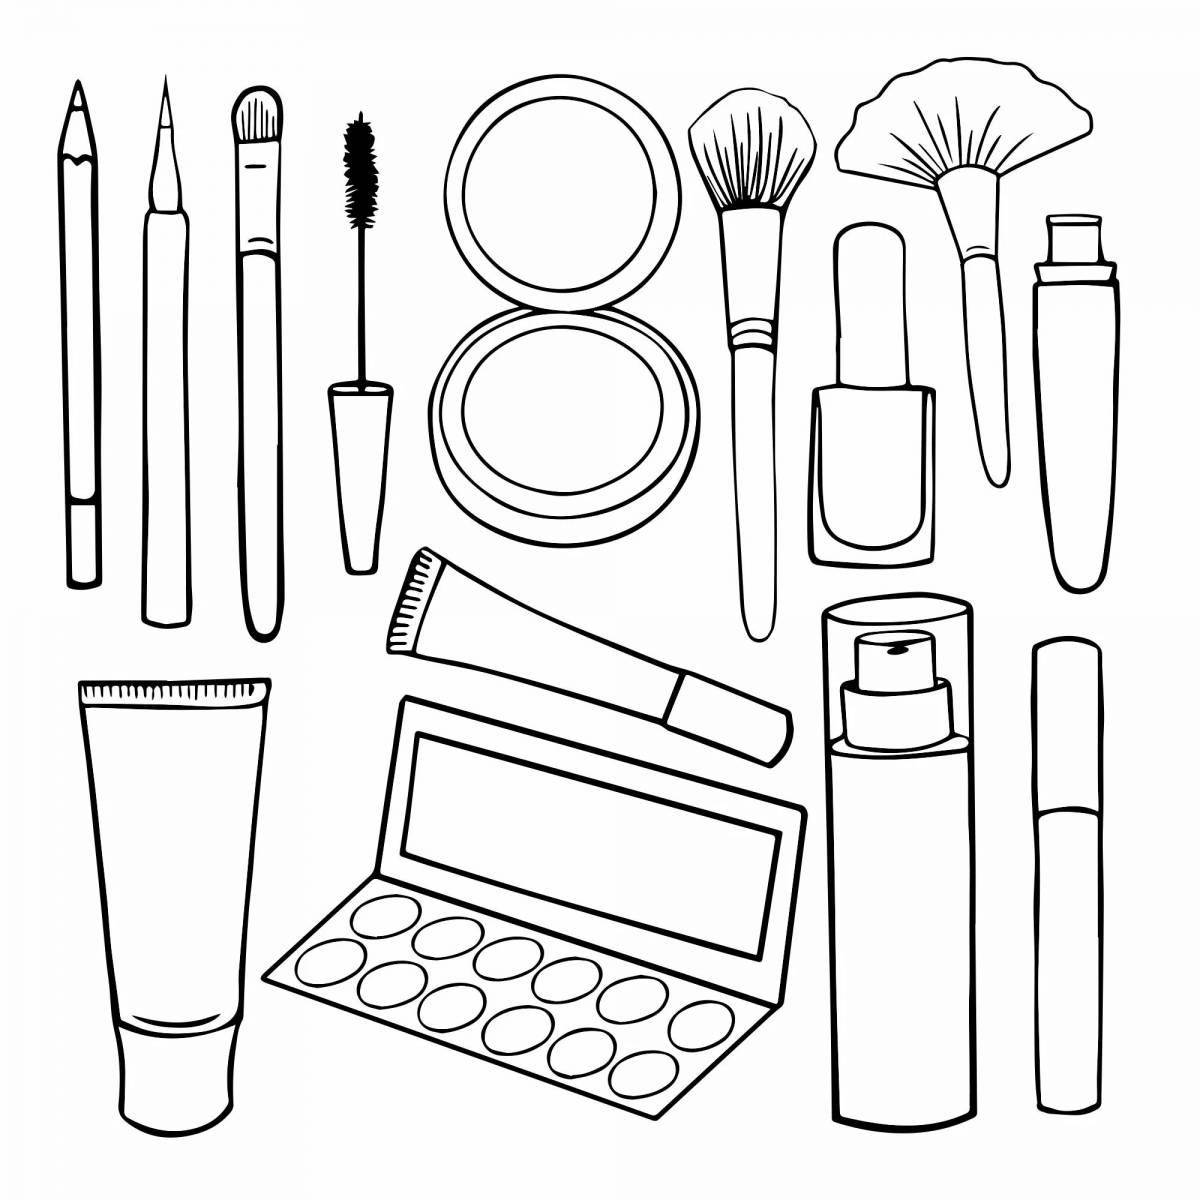 Great cosmetics coloring book for kids